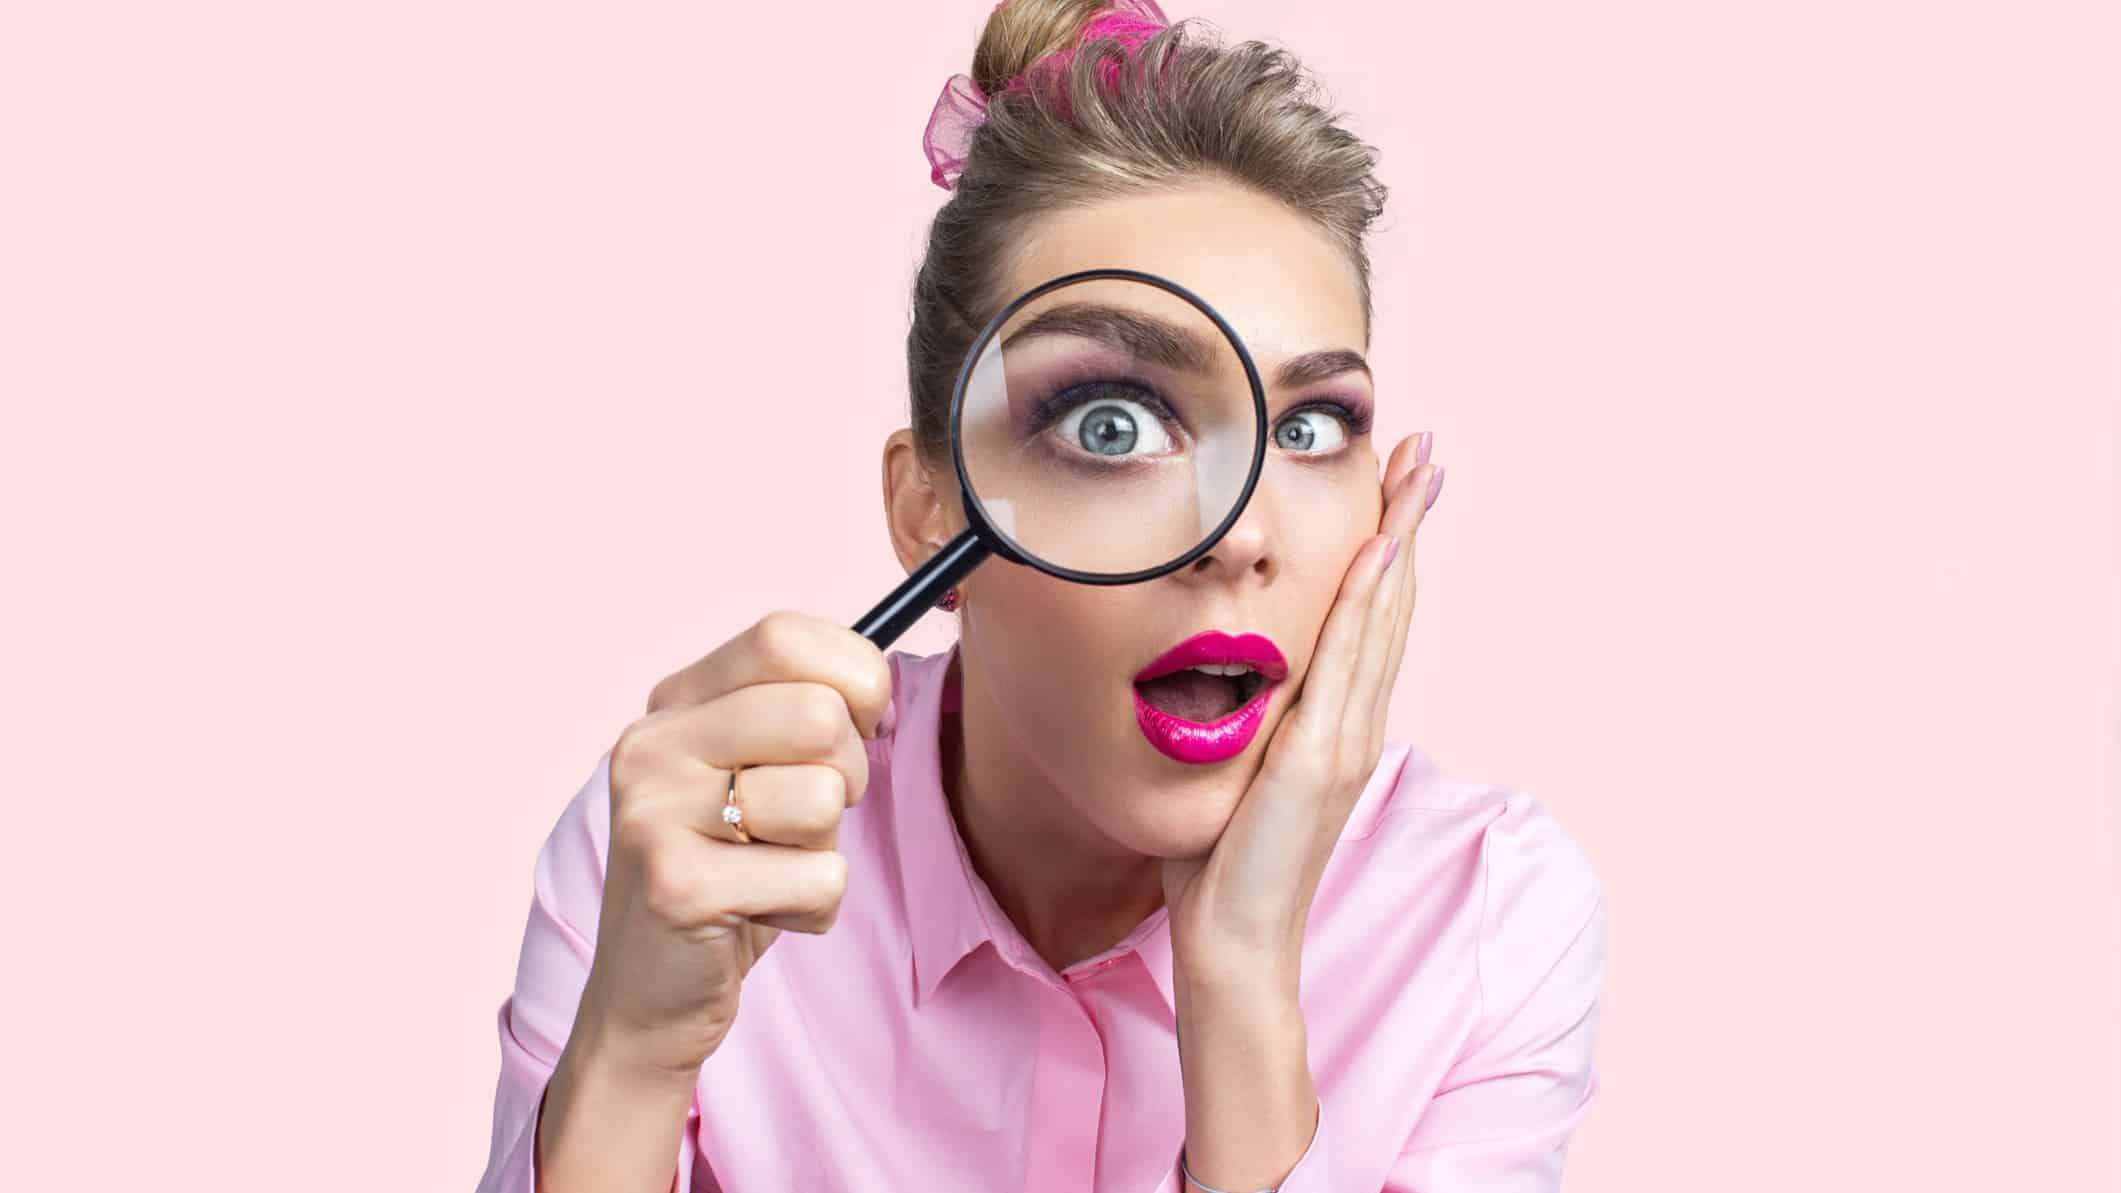 A female ASX investor looks through a magnifying glass that enlarges her eye and holds her hand to her face with her mouth open as if looking at something of great interest or surprise such as the rising Xero share price over the past decade